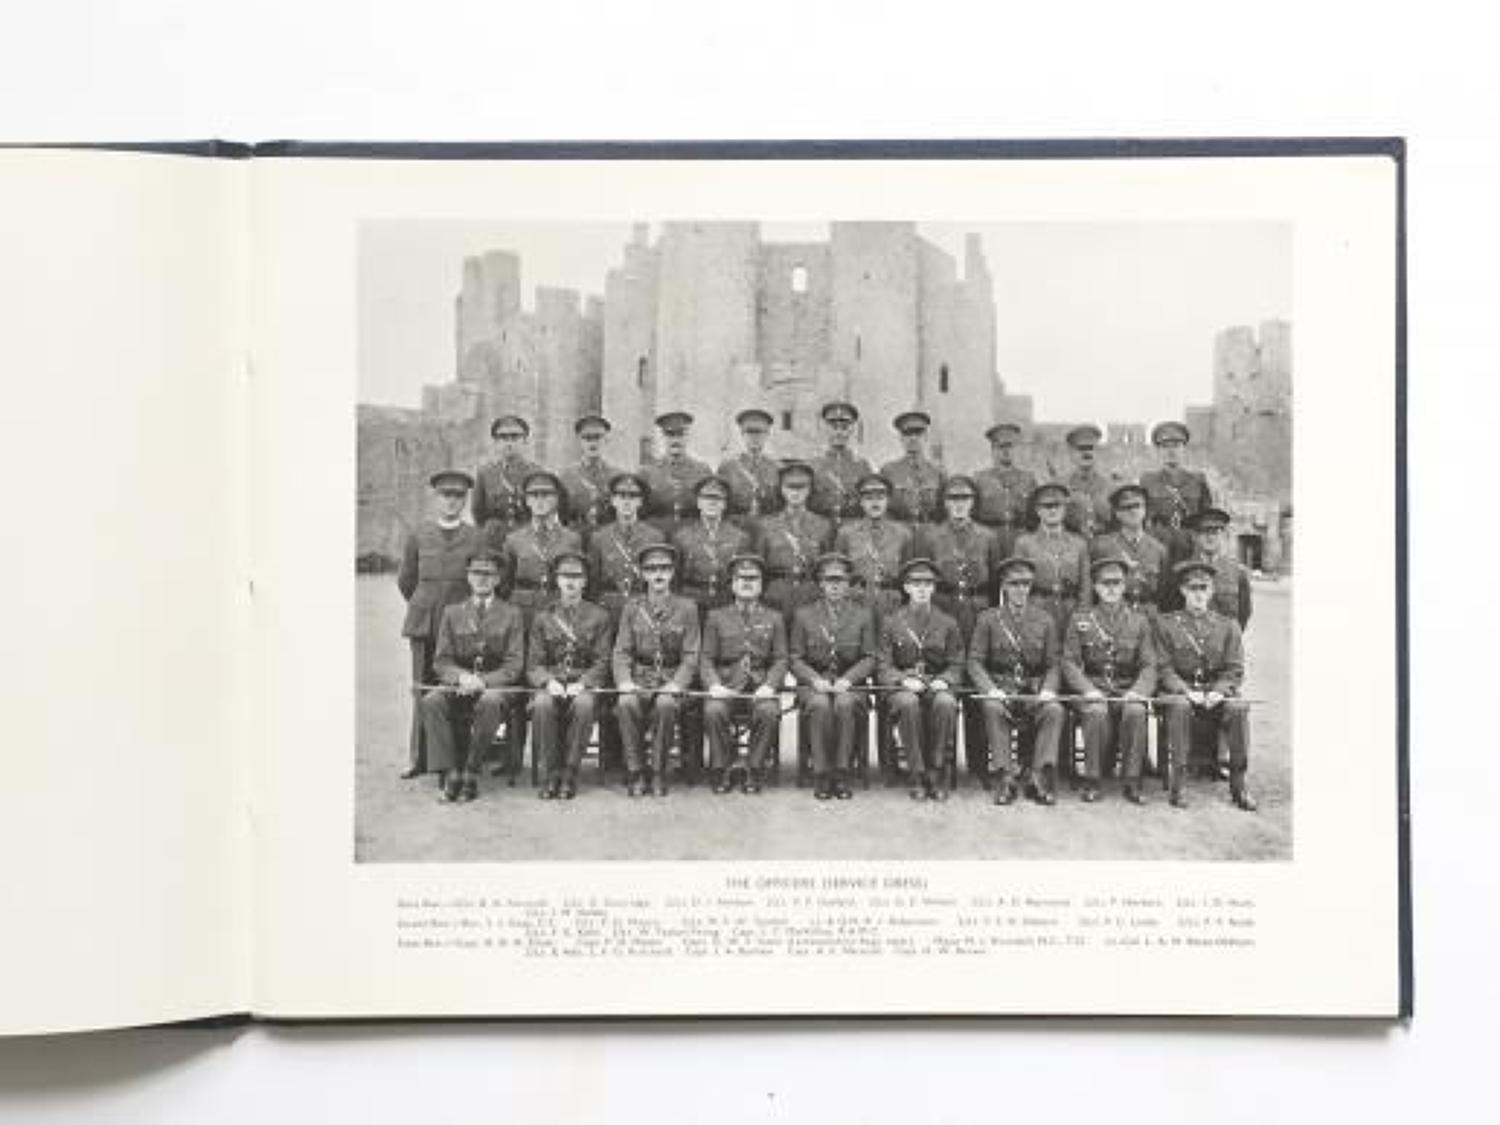 WW2 1940 12th Bn Royal Fusiliers Picture Booklet.